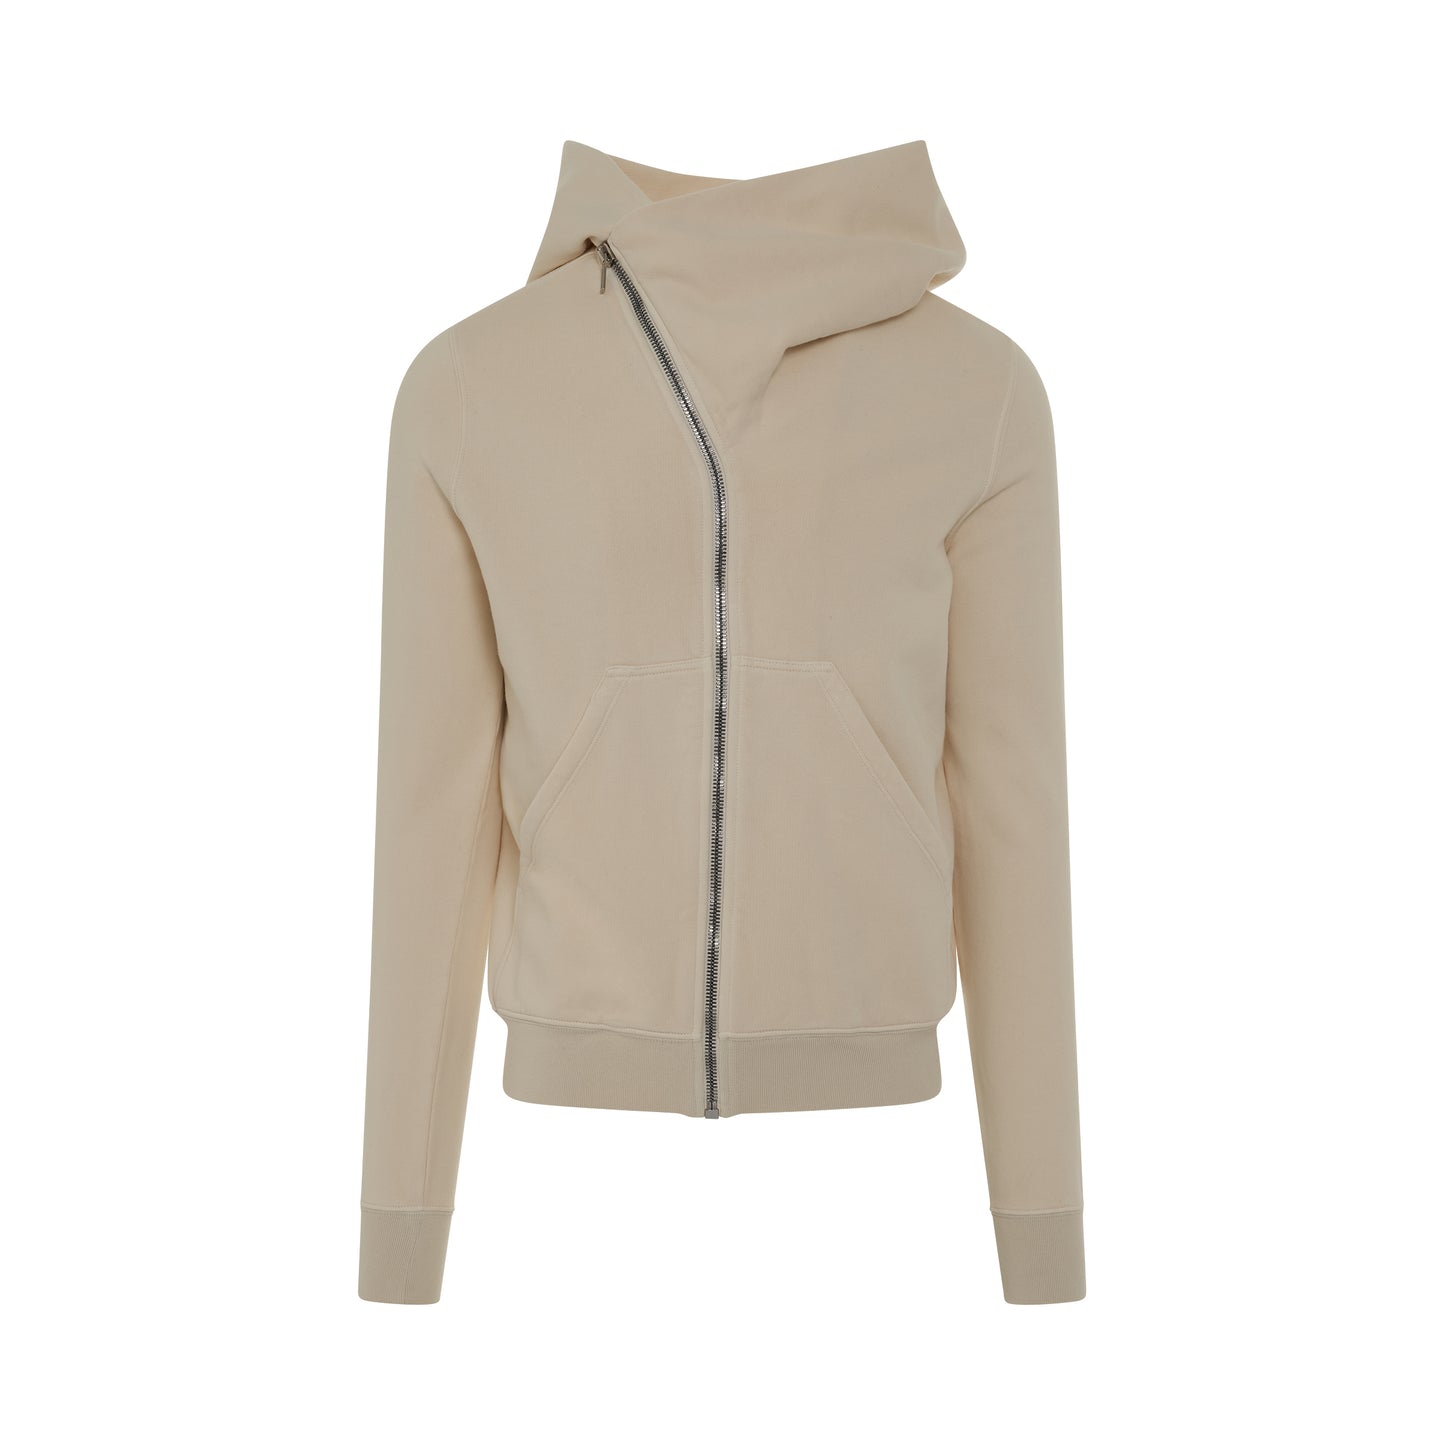 DRKSHDW Cotton Mountain Jacket in Natural